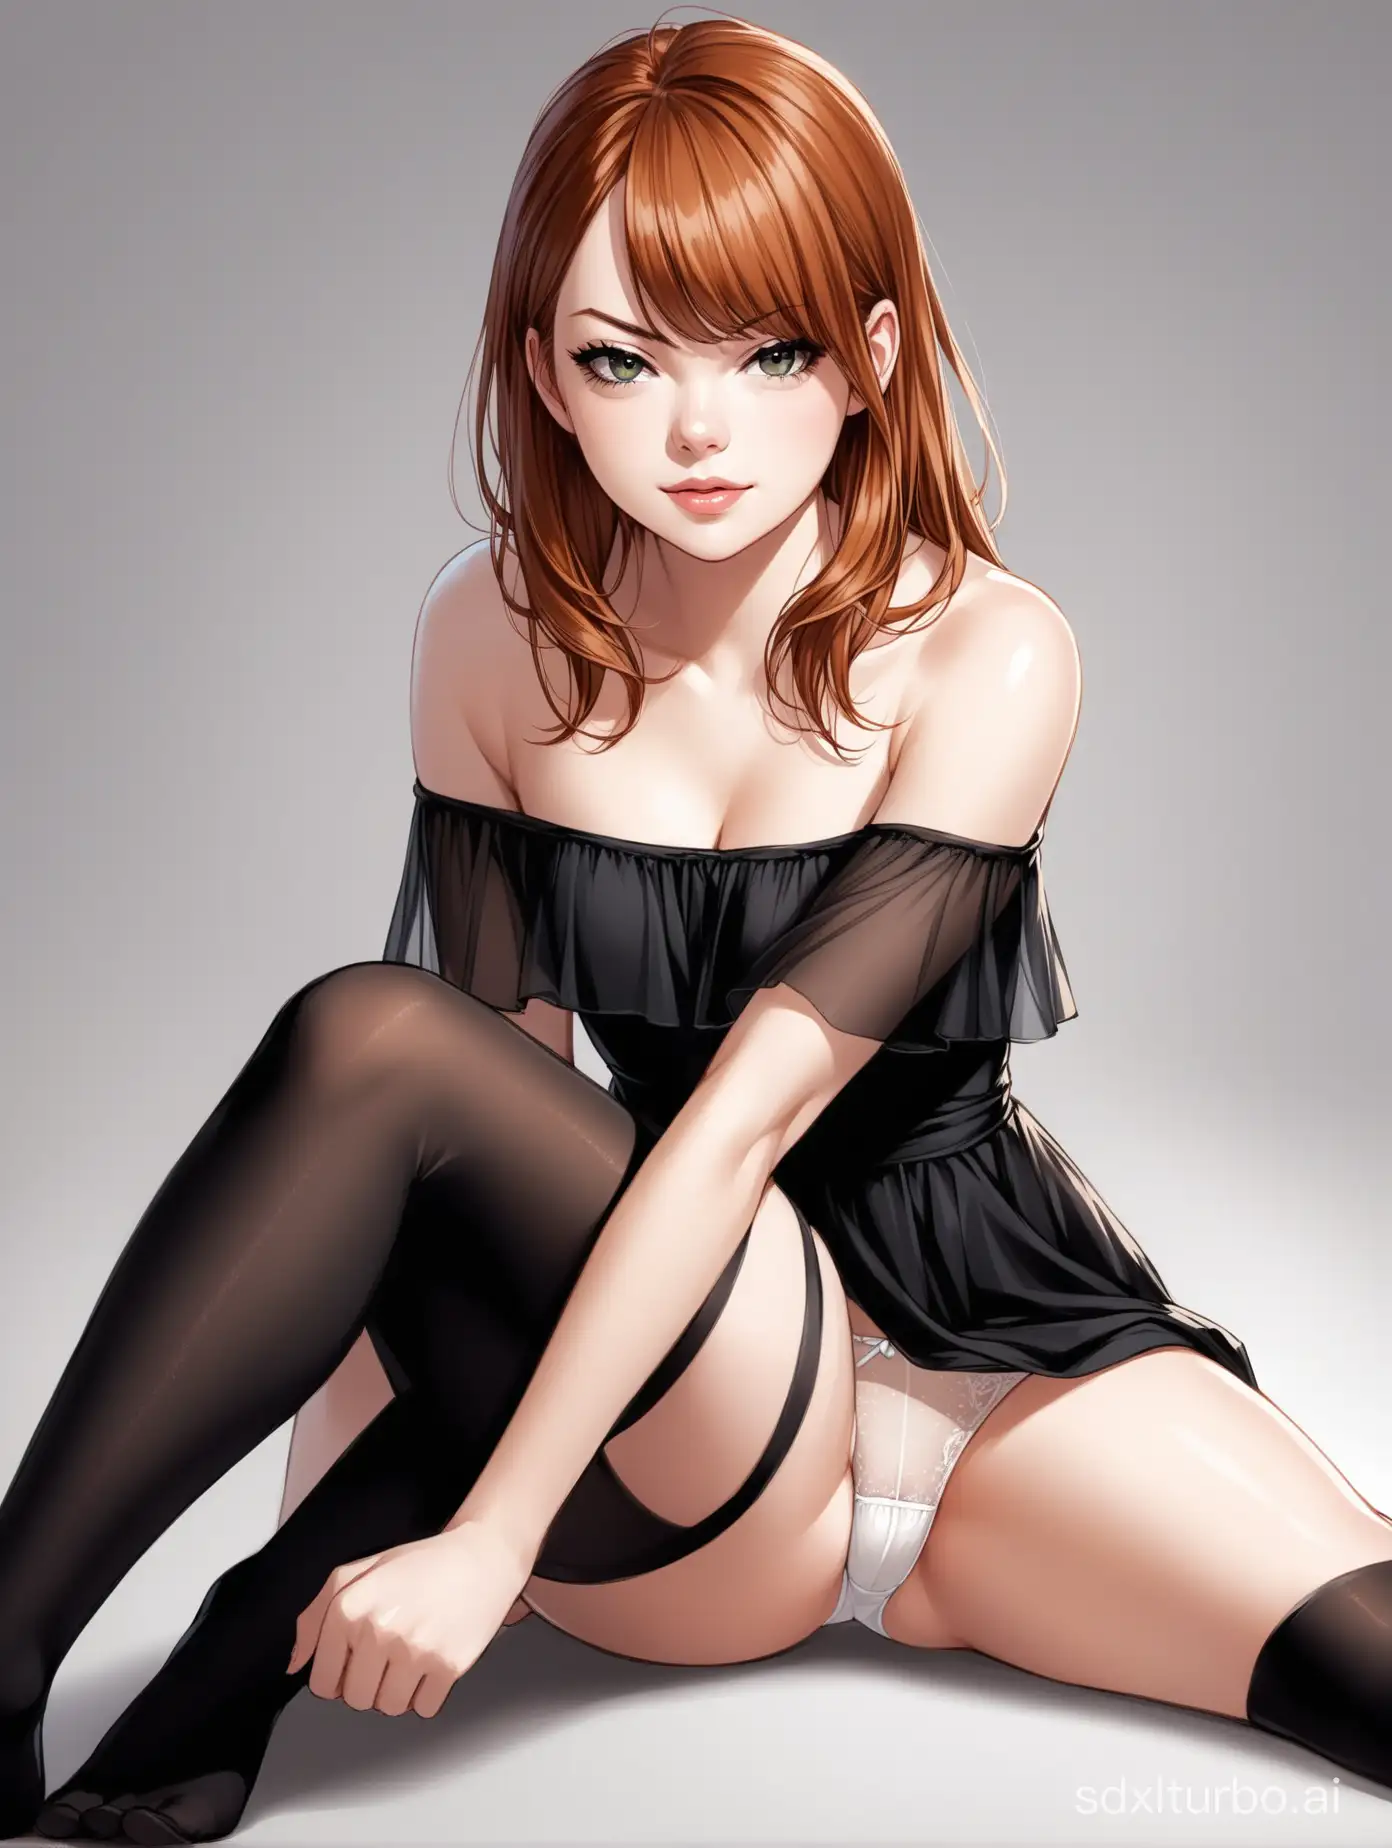 Disdainful-Girl-Sitting-in-Black-Dress-and-Stockings